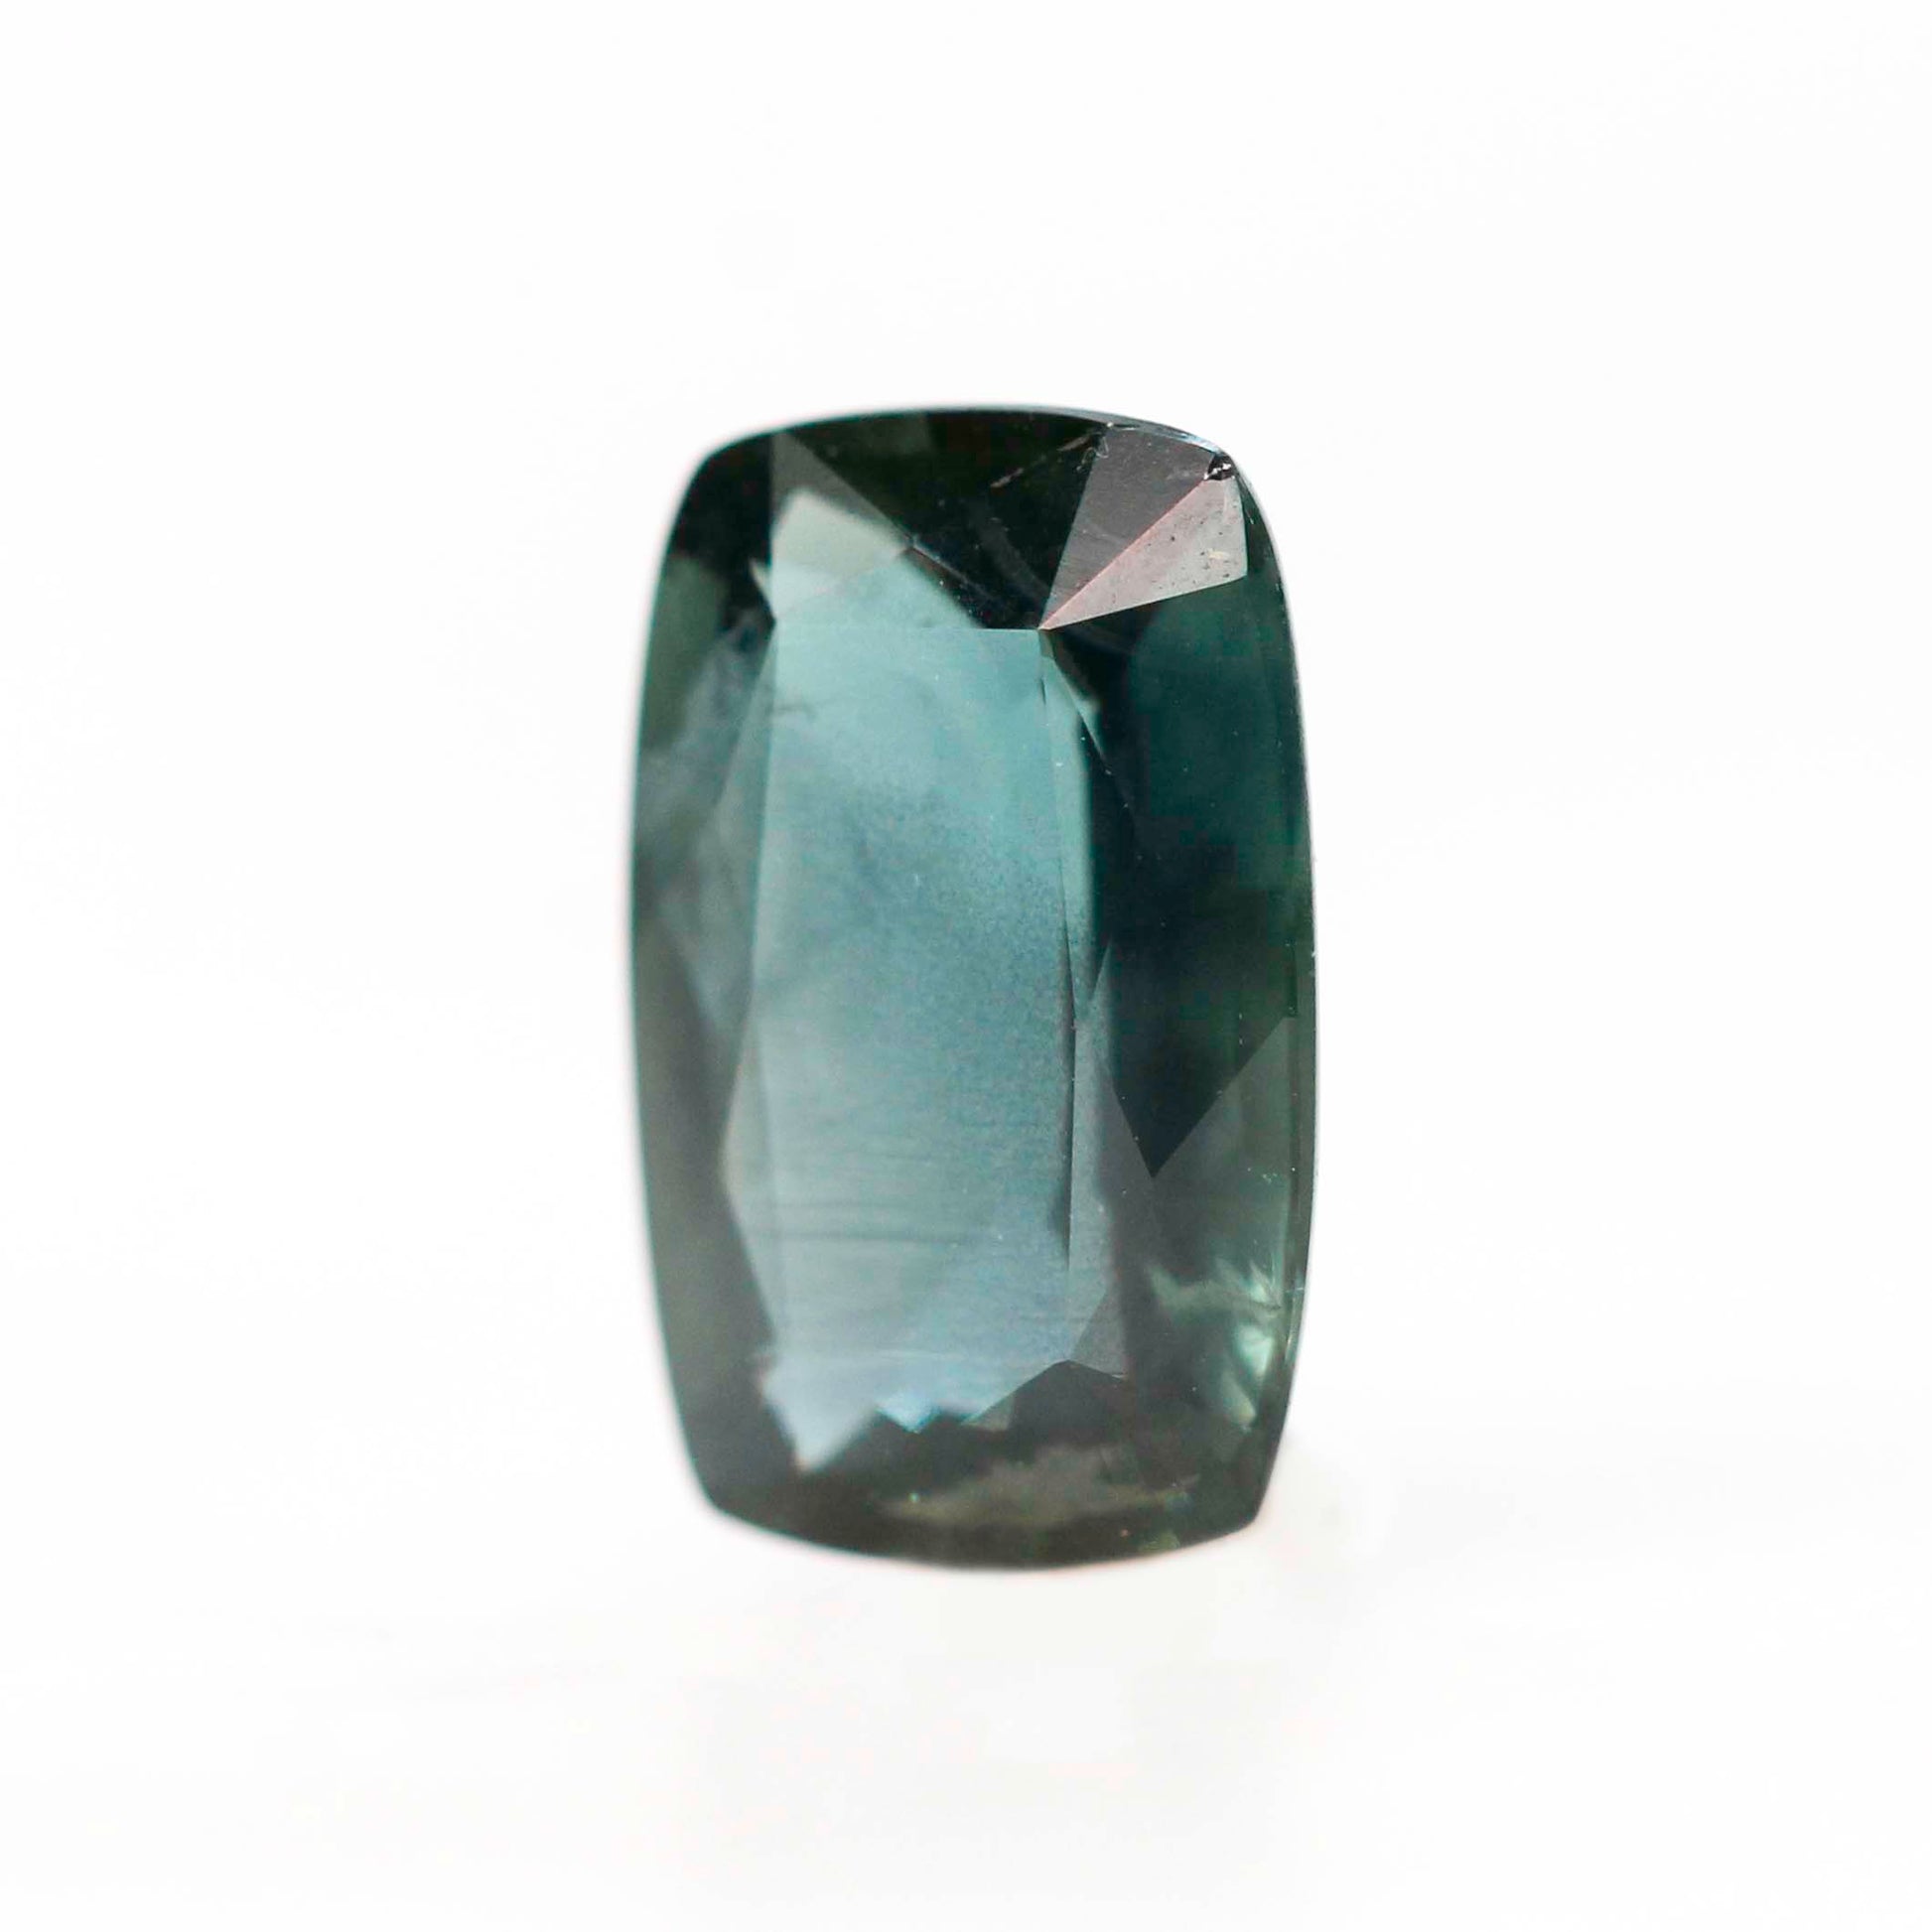 0.92 Carat Teal Elongated Cushion Sapphire for Custom Work - Inventory Code TECS092 - Midwinter Co. Alternative Bridal Rings and Modern Fine Jewelry